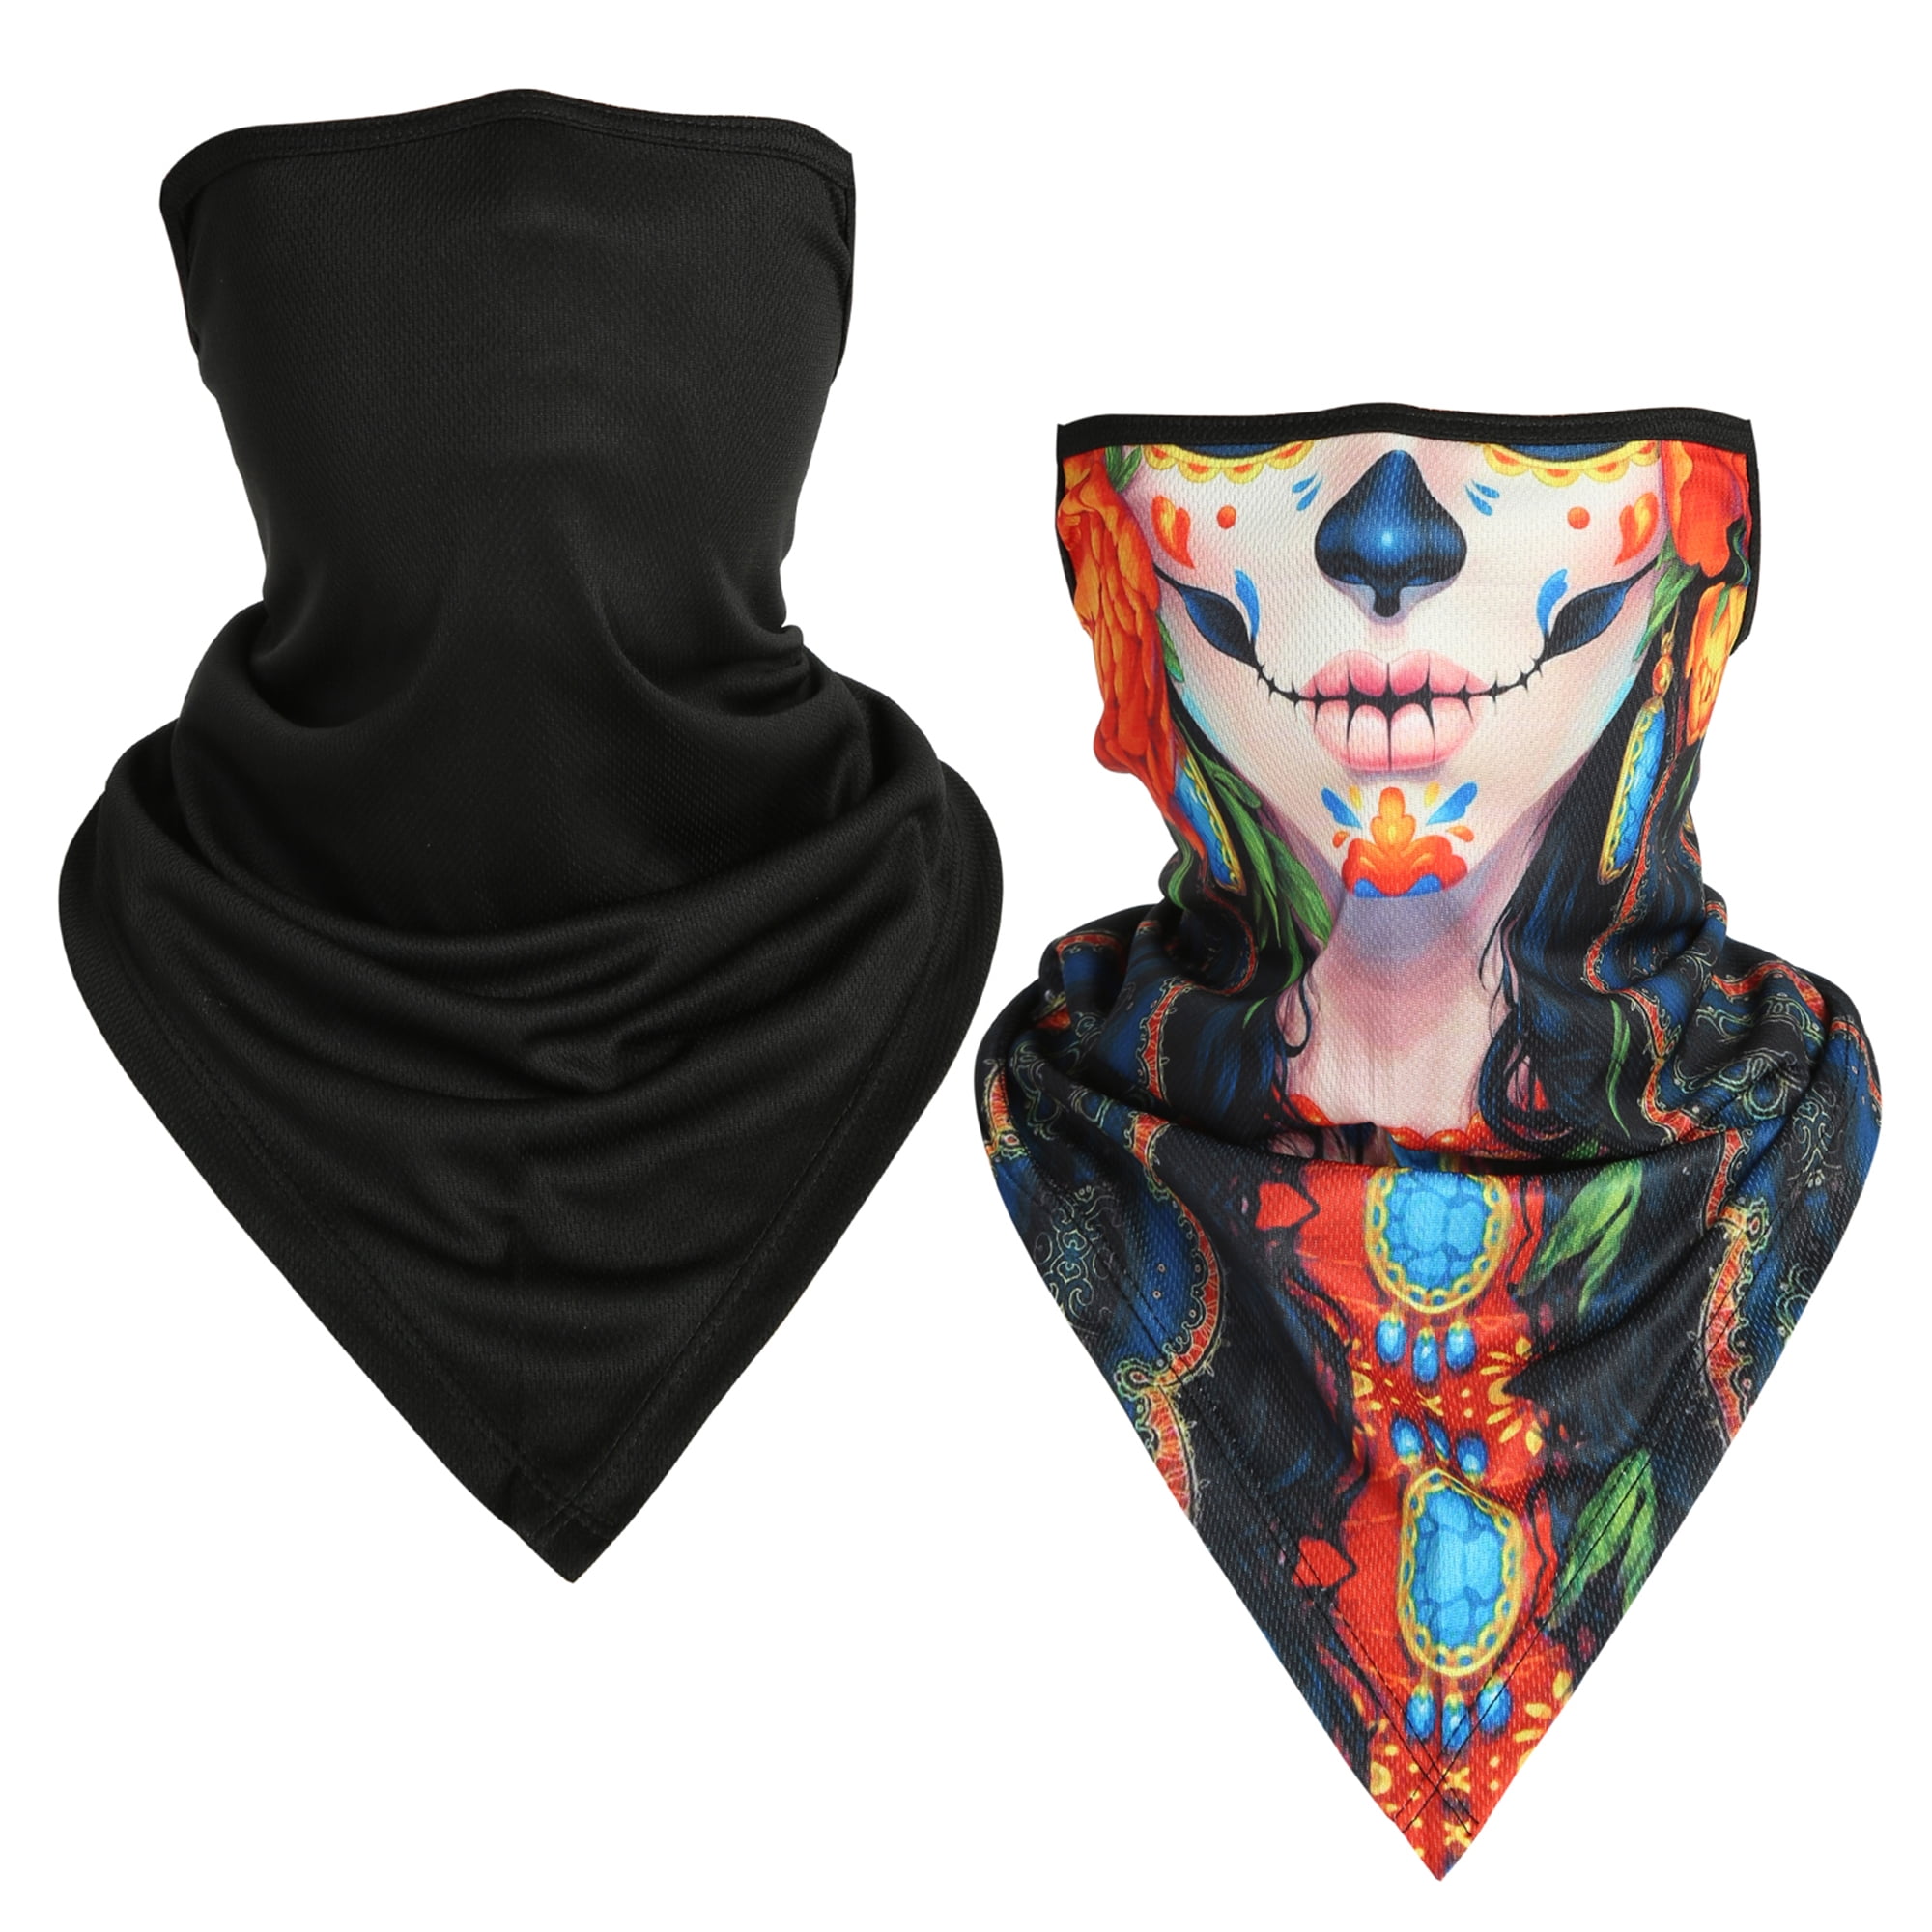 Details about   Face Mask Bandana Balaclava Neck Gaiter Breathable Scarf Headwrap with Loops Ear 